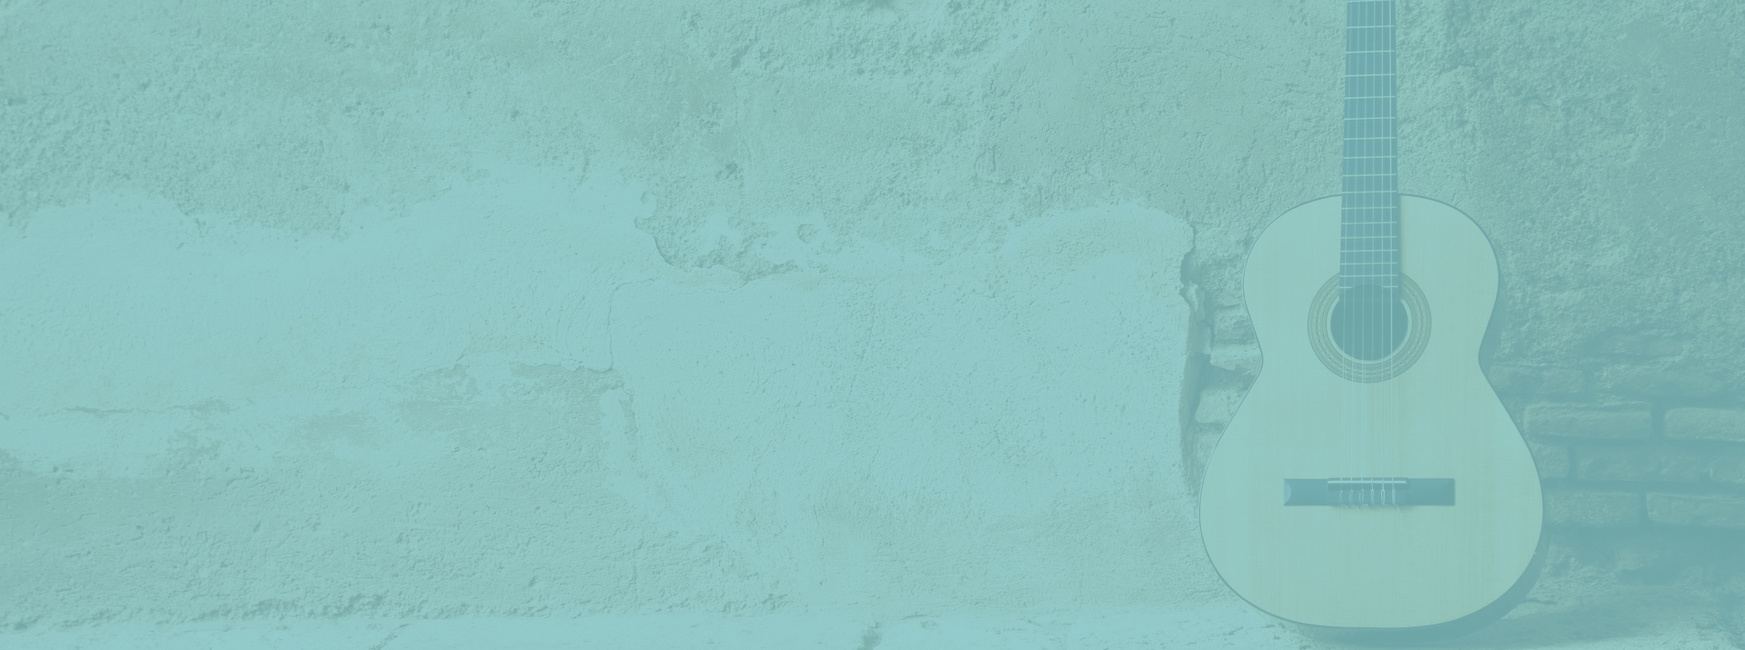 An acoustic guitar leaning against a cement wall with a light teal color overlaid.